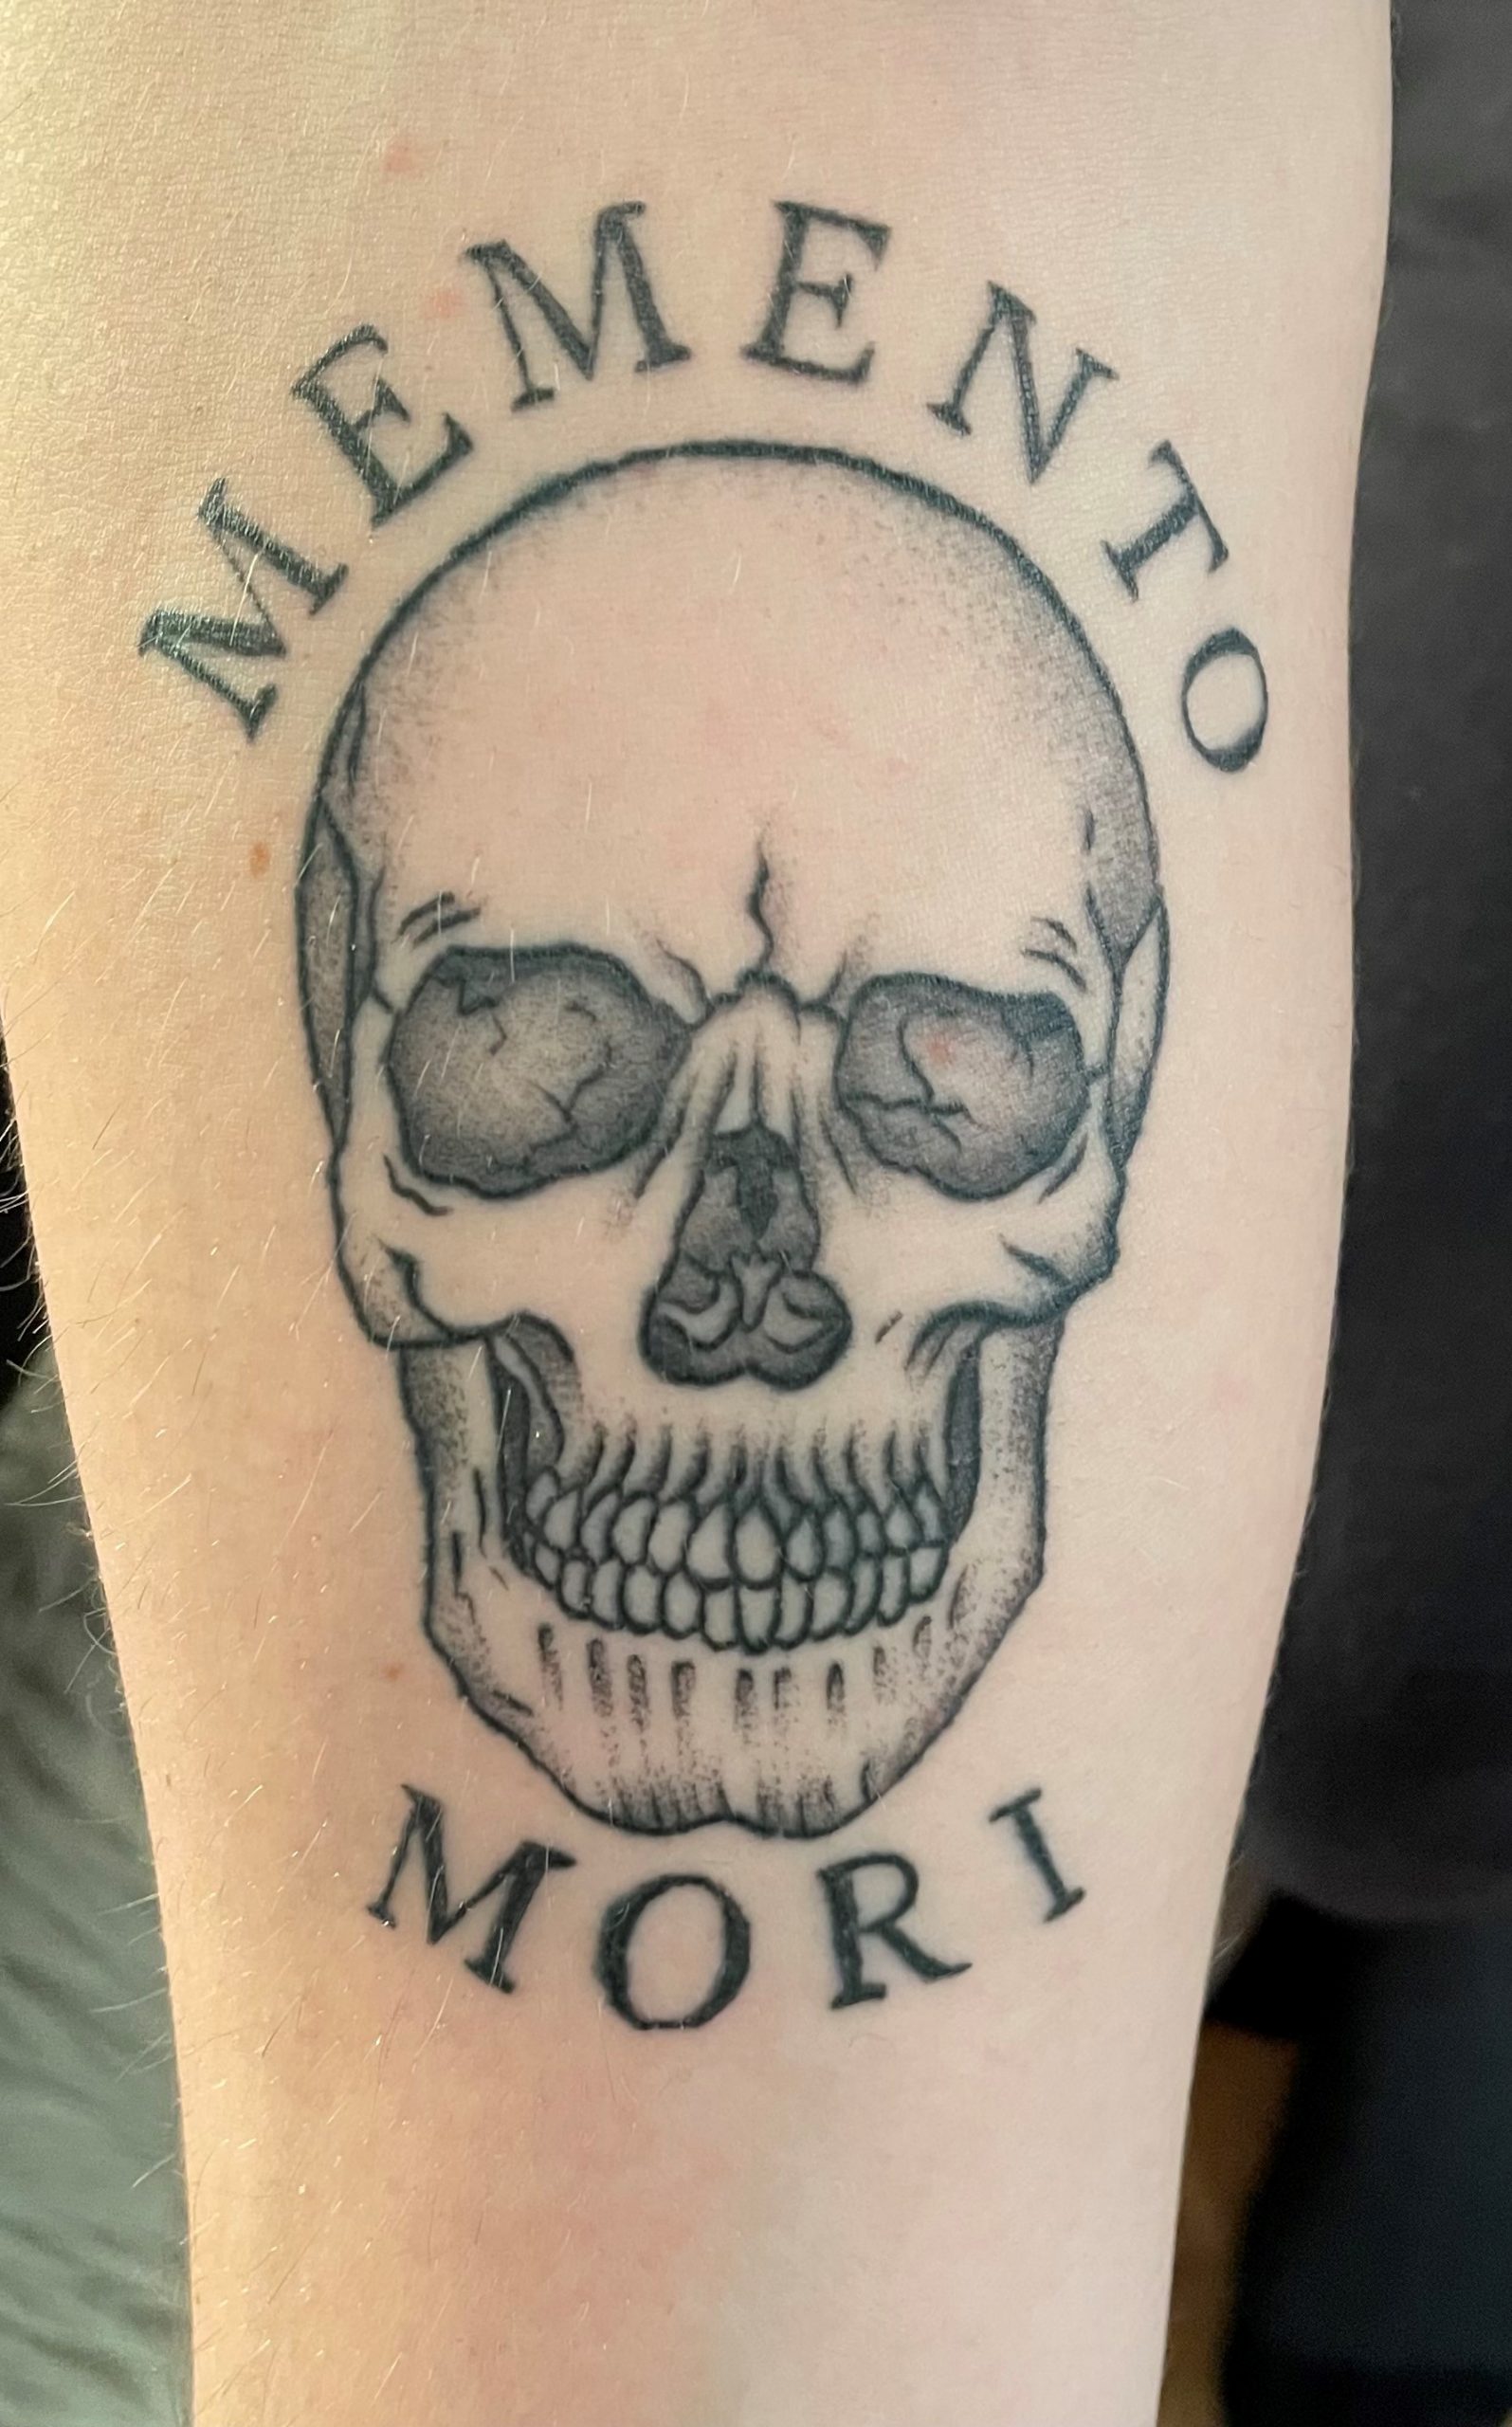 photo of a tattoo depicting a symbol of death: a skull and a caption "memento mori"